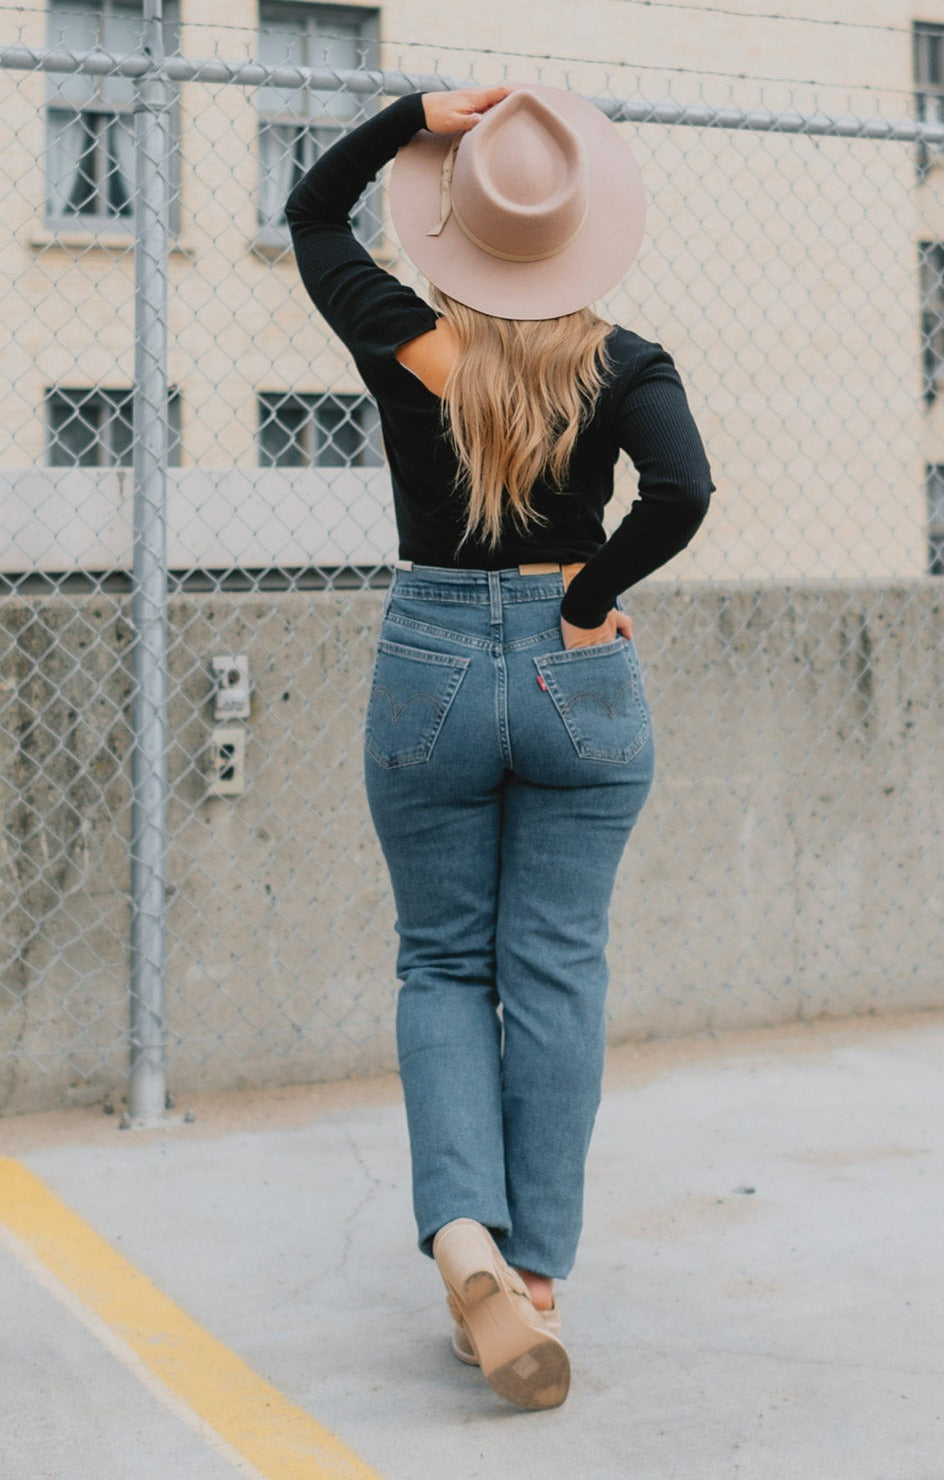 Wedgie Straight Jeans - Levi's Jeans, Jackets & Clothing